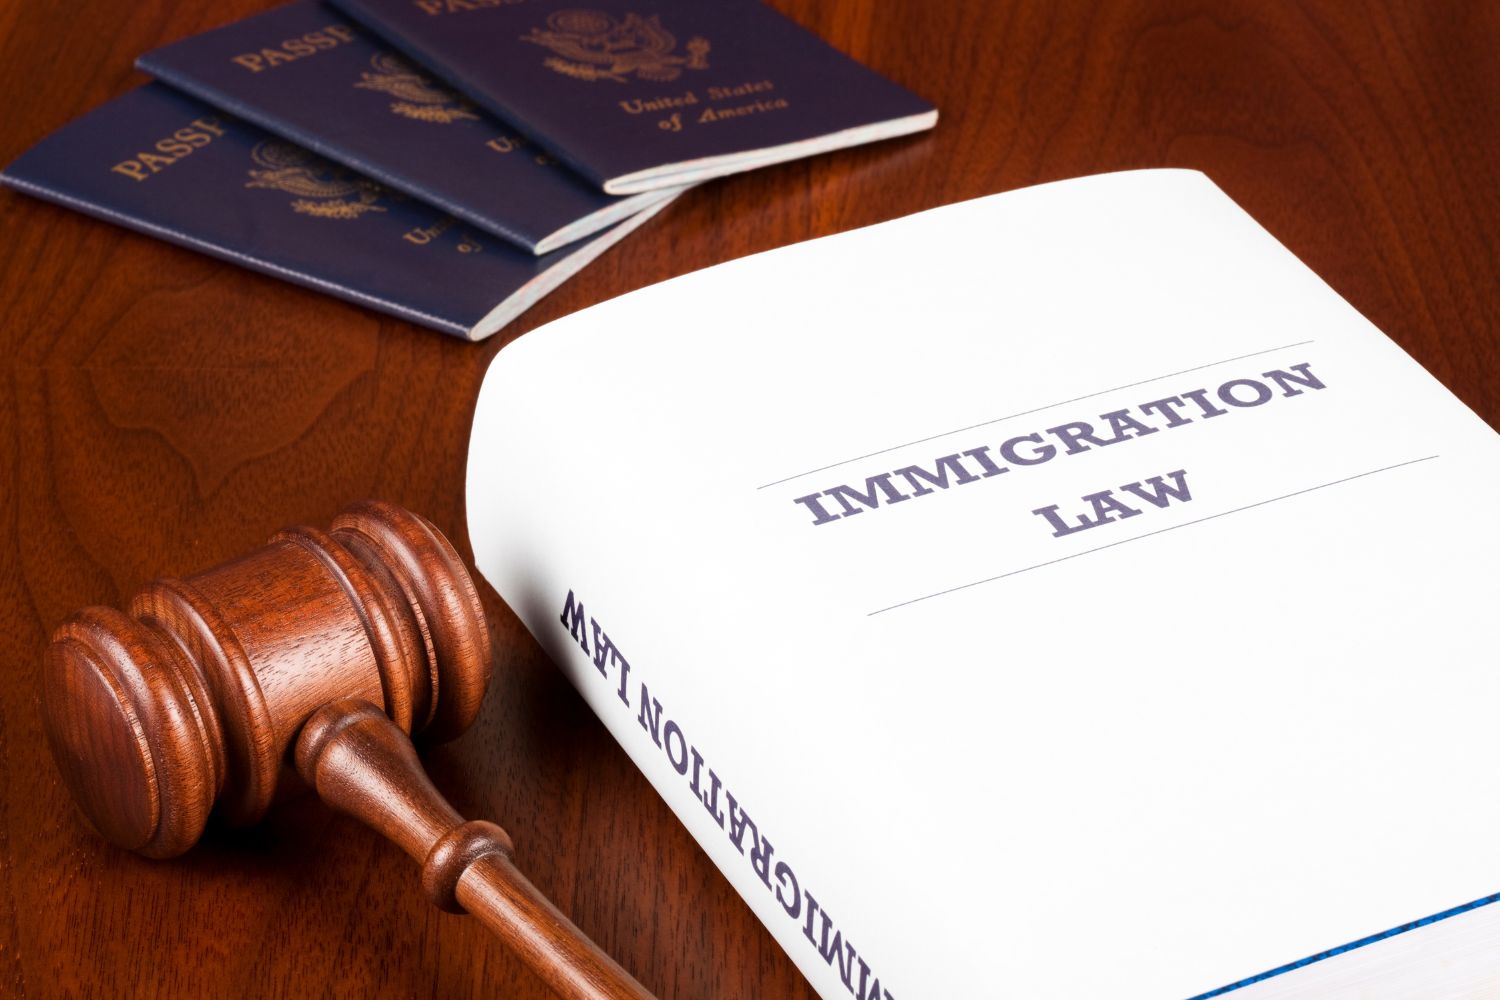 Some Top Tips for Choosing an Immigrant Law Firm